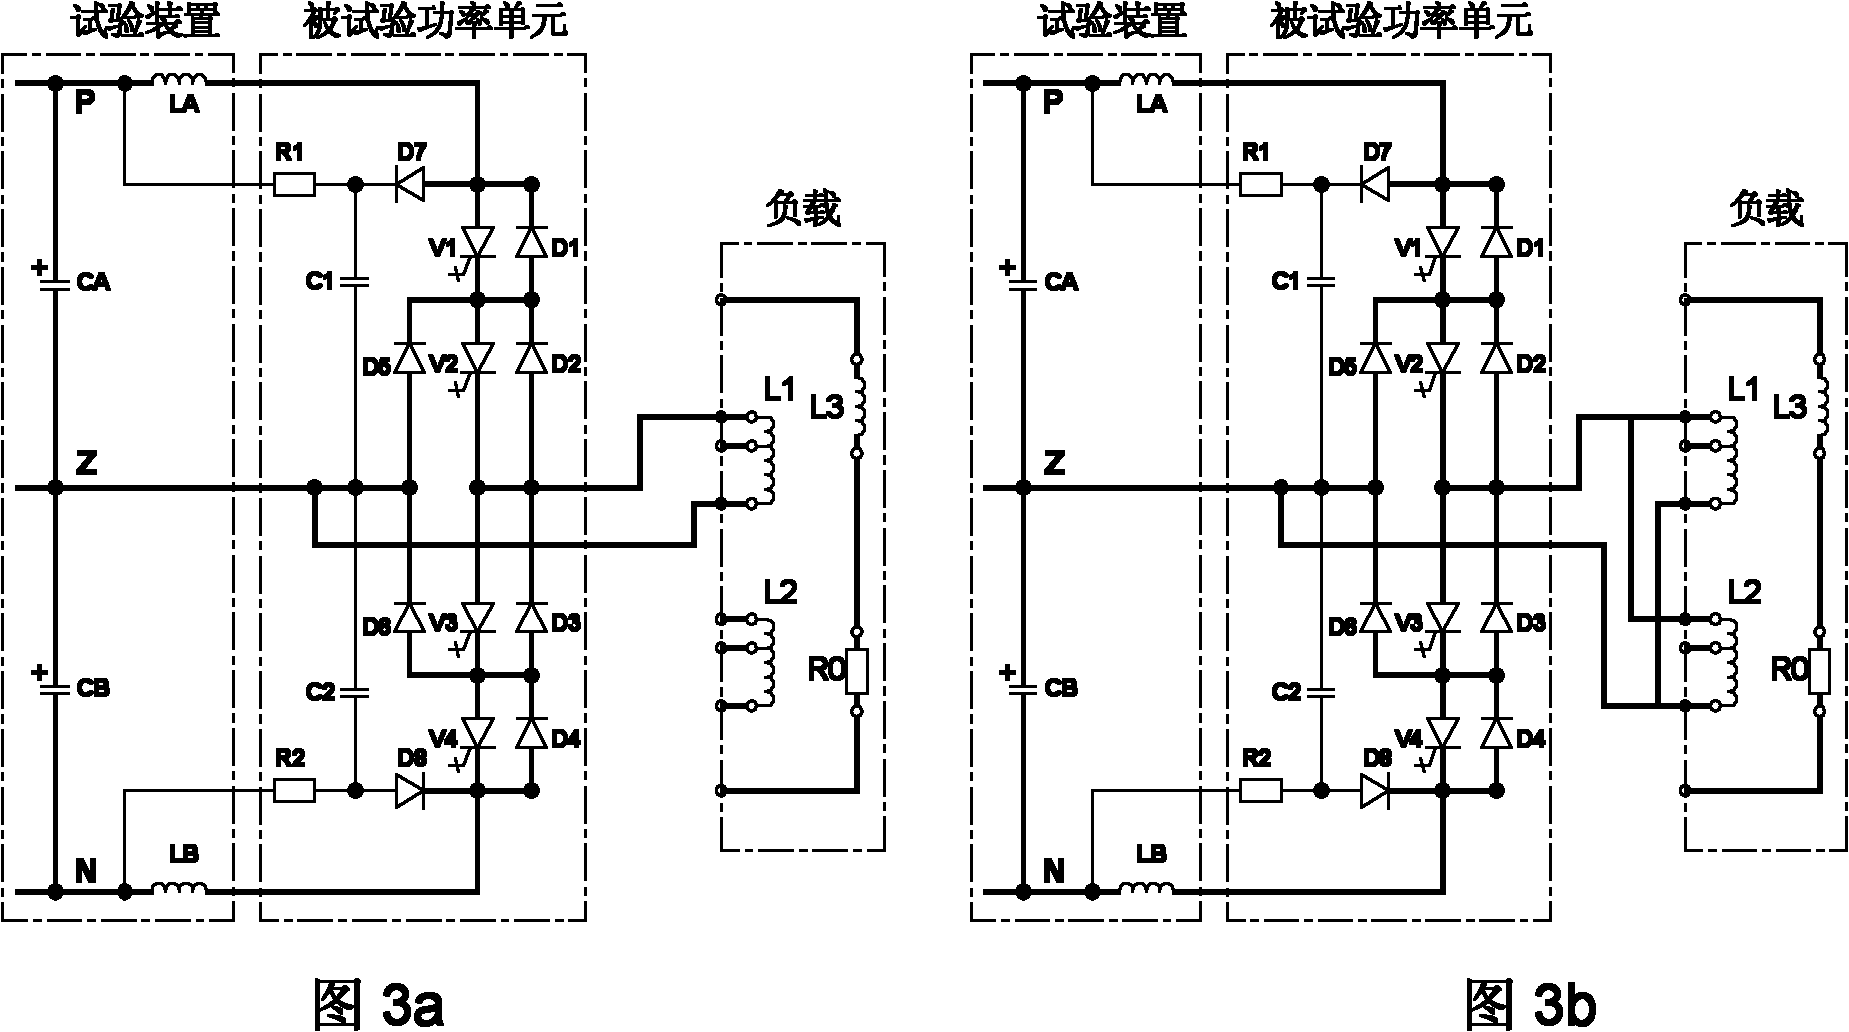 Power unit testing circuit for IGCT (integrated gate commutated thyristor) three-level medium voltage frequency converter